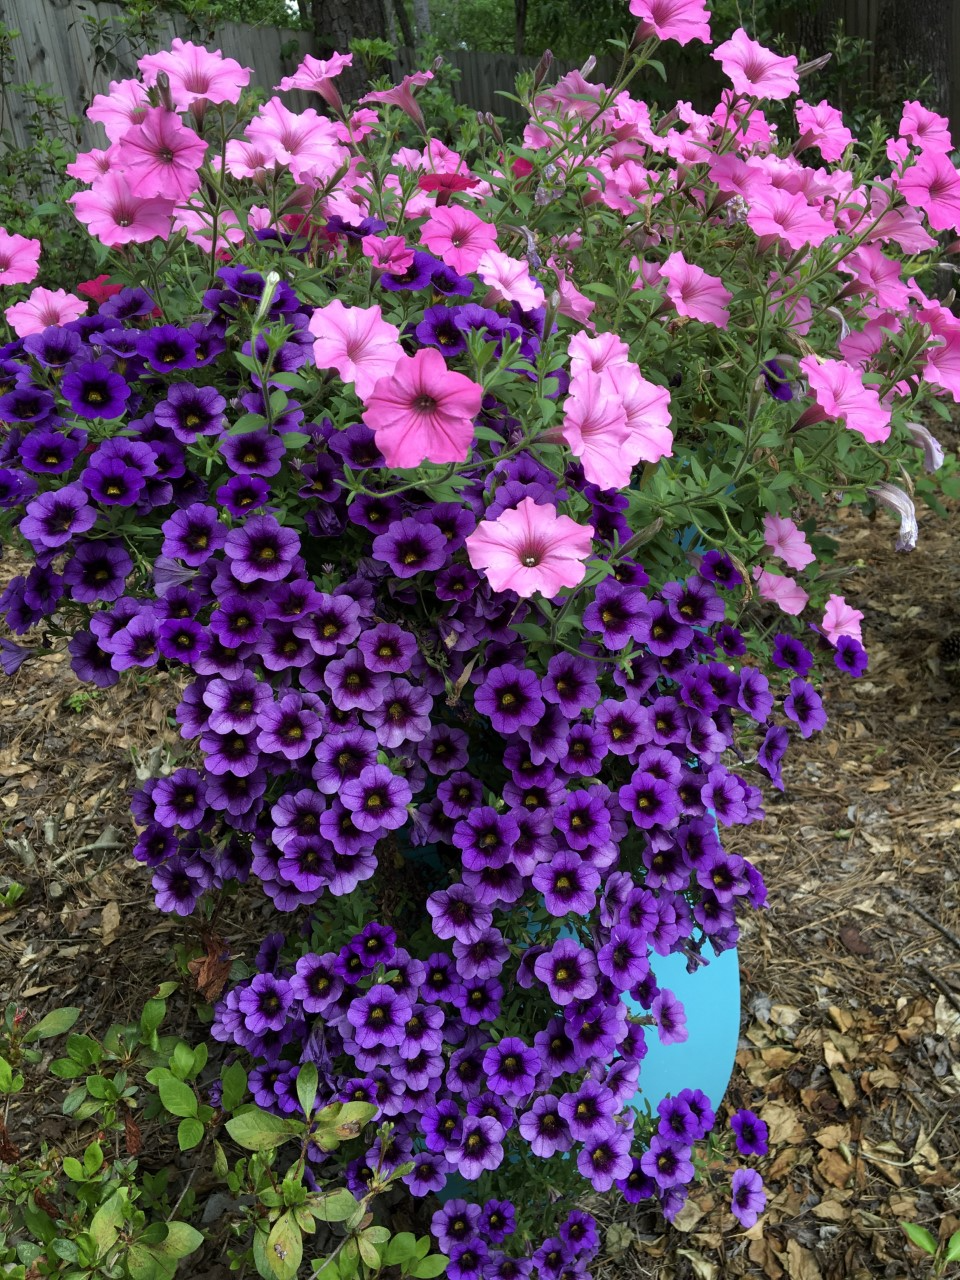 This container in early May was planted in Early October with Supertunia Vista Bubblegum and Superbells Grape Punch calibrachoa.